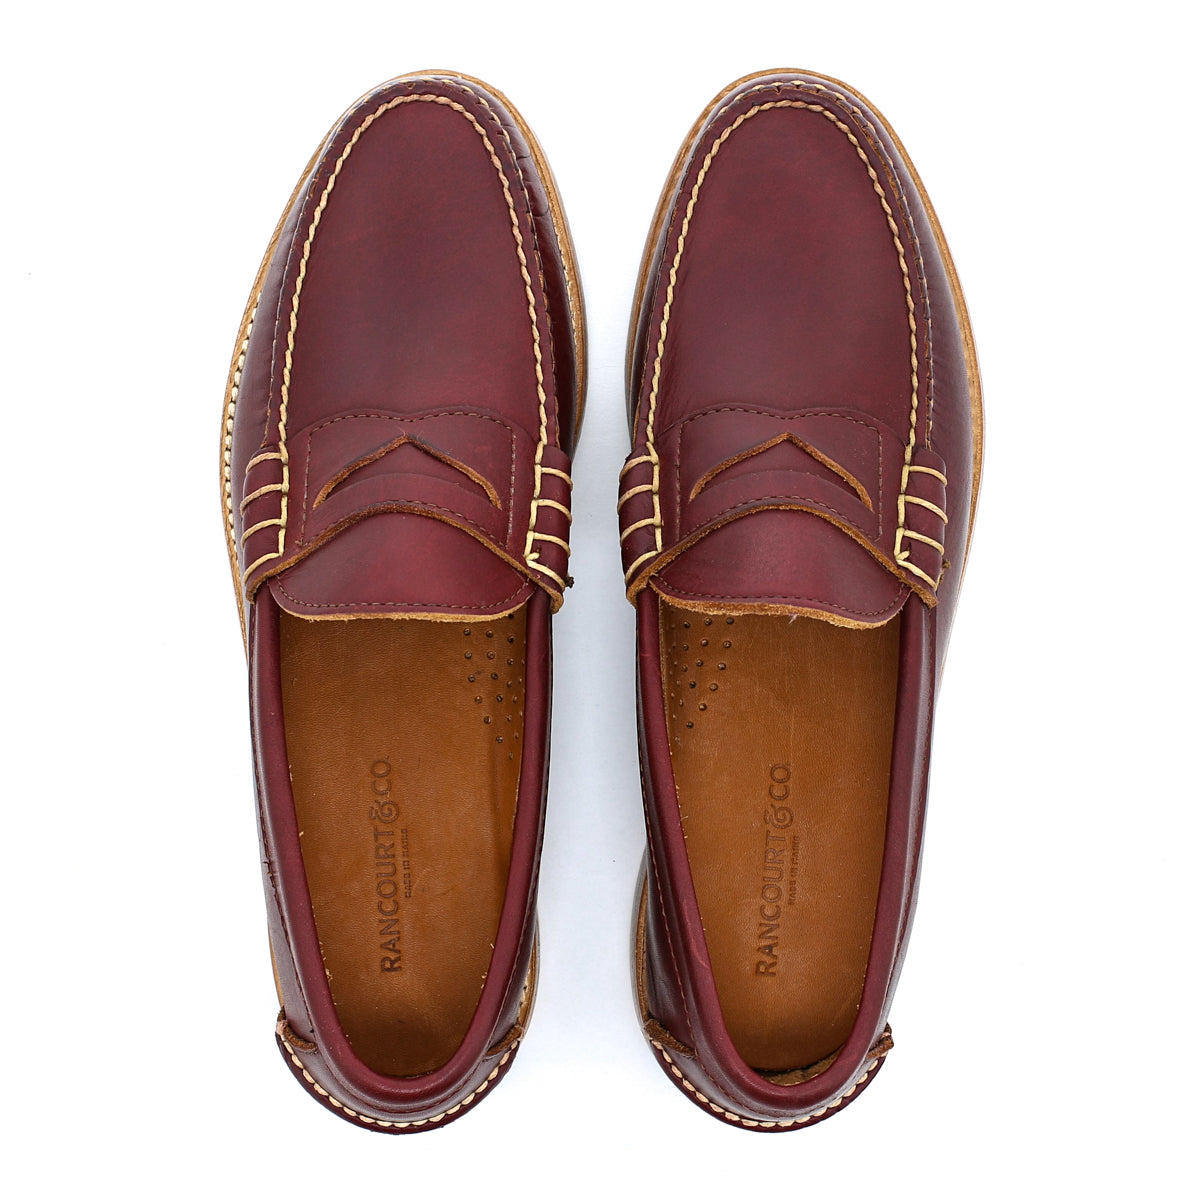 Beefroll Penny Loafers - Burgundy